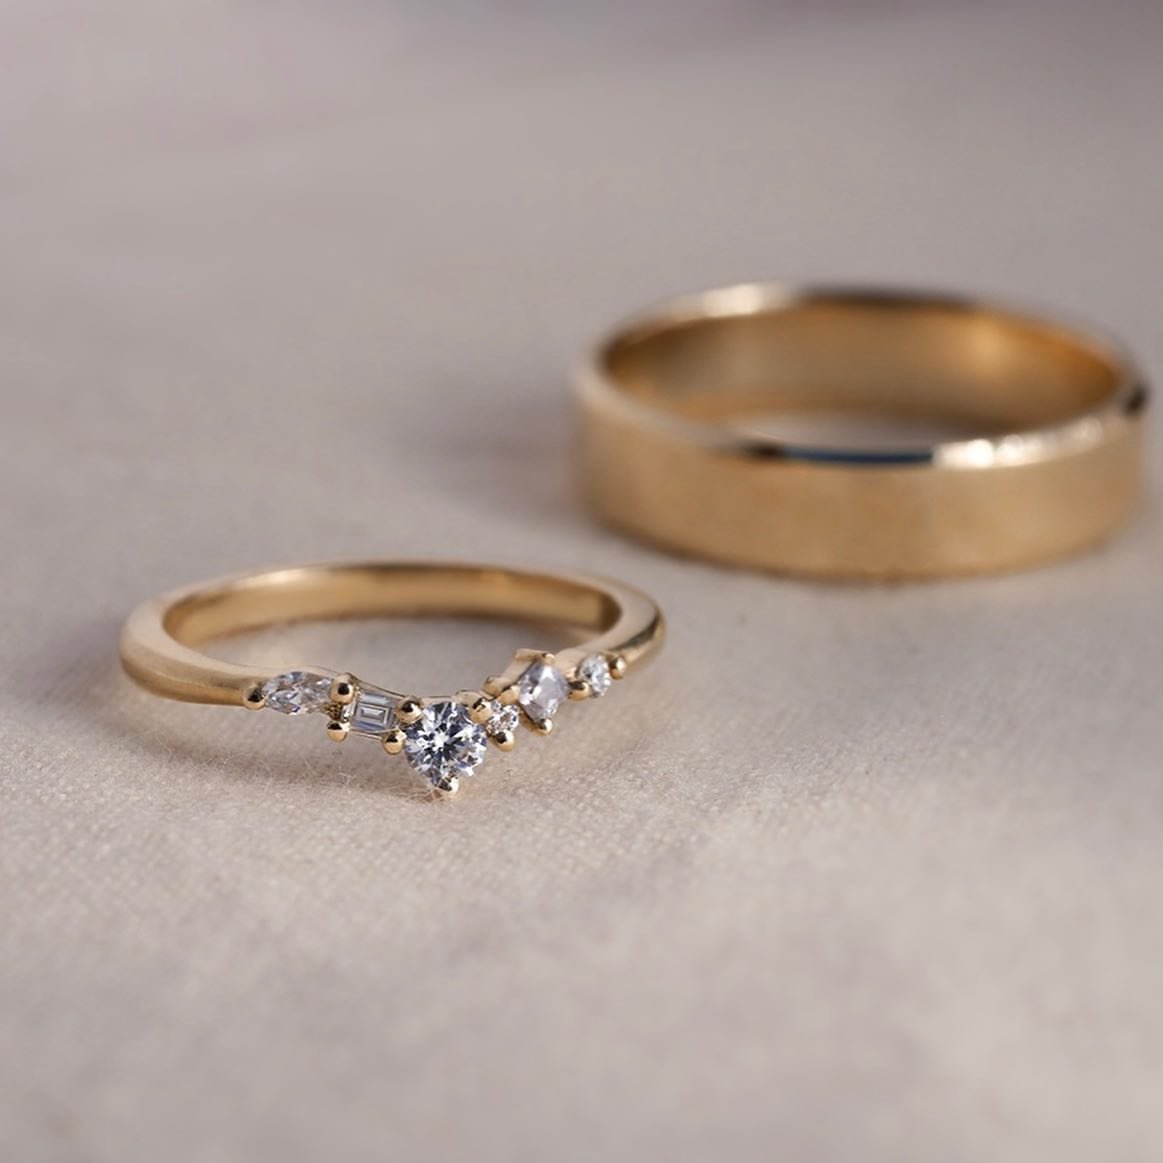 ✨wedding rings for Ashleigh &amp; Spencer✨

A couple of years ago Sam &amp; I made Ashleigh&rsquo;s engagement ring, an Astra VI ring. A few months later they got in touch for their wedding rings and we were so excited to make more special jewels for